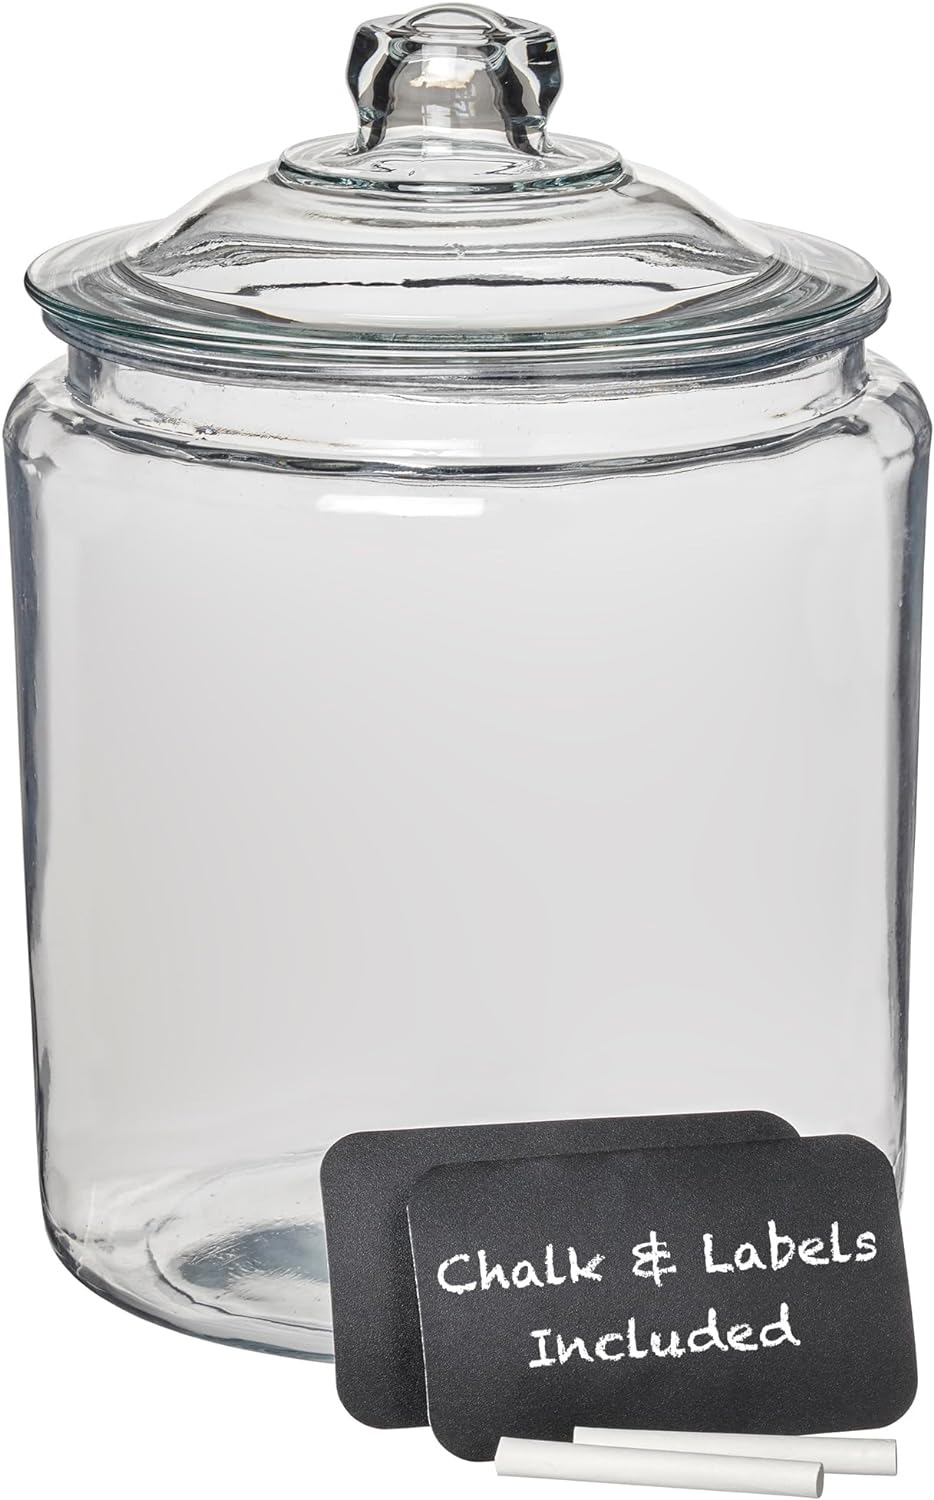 Anchor Hocking Heritage Hill Lid and 2 Chalkboard Labels Glass Jar, 2 Gal Clear